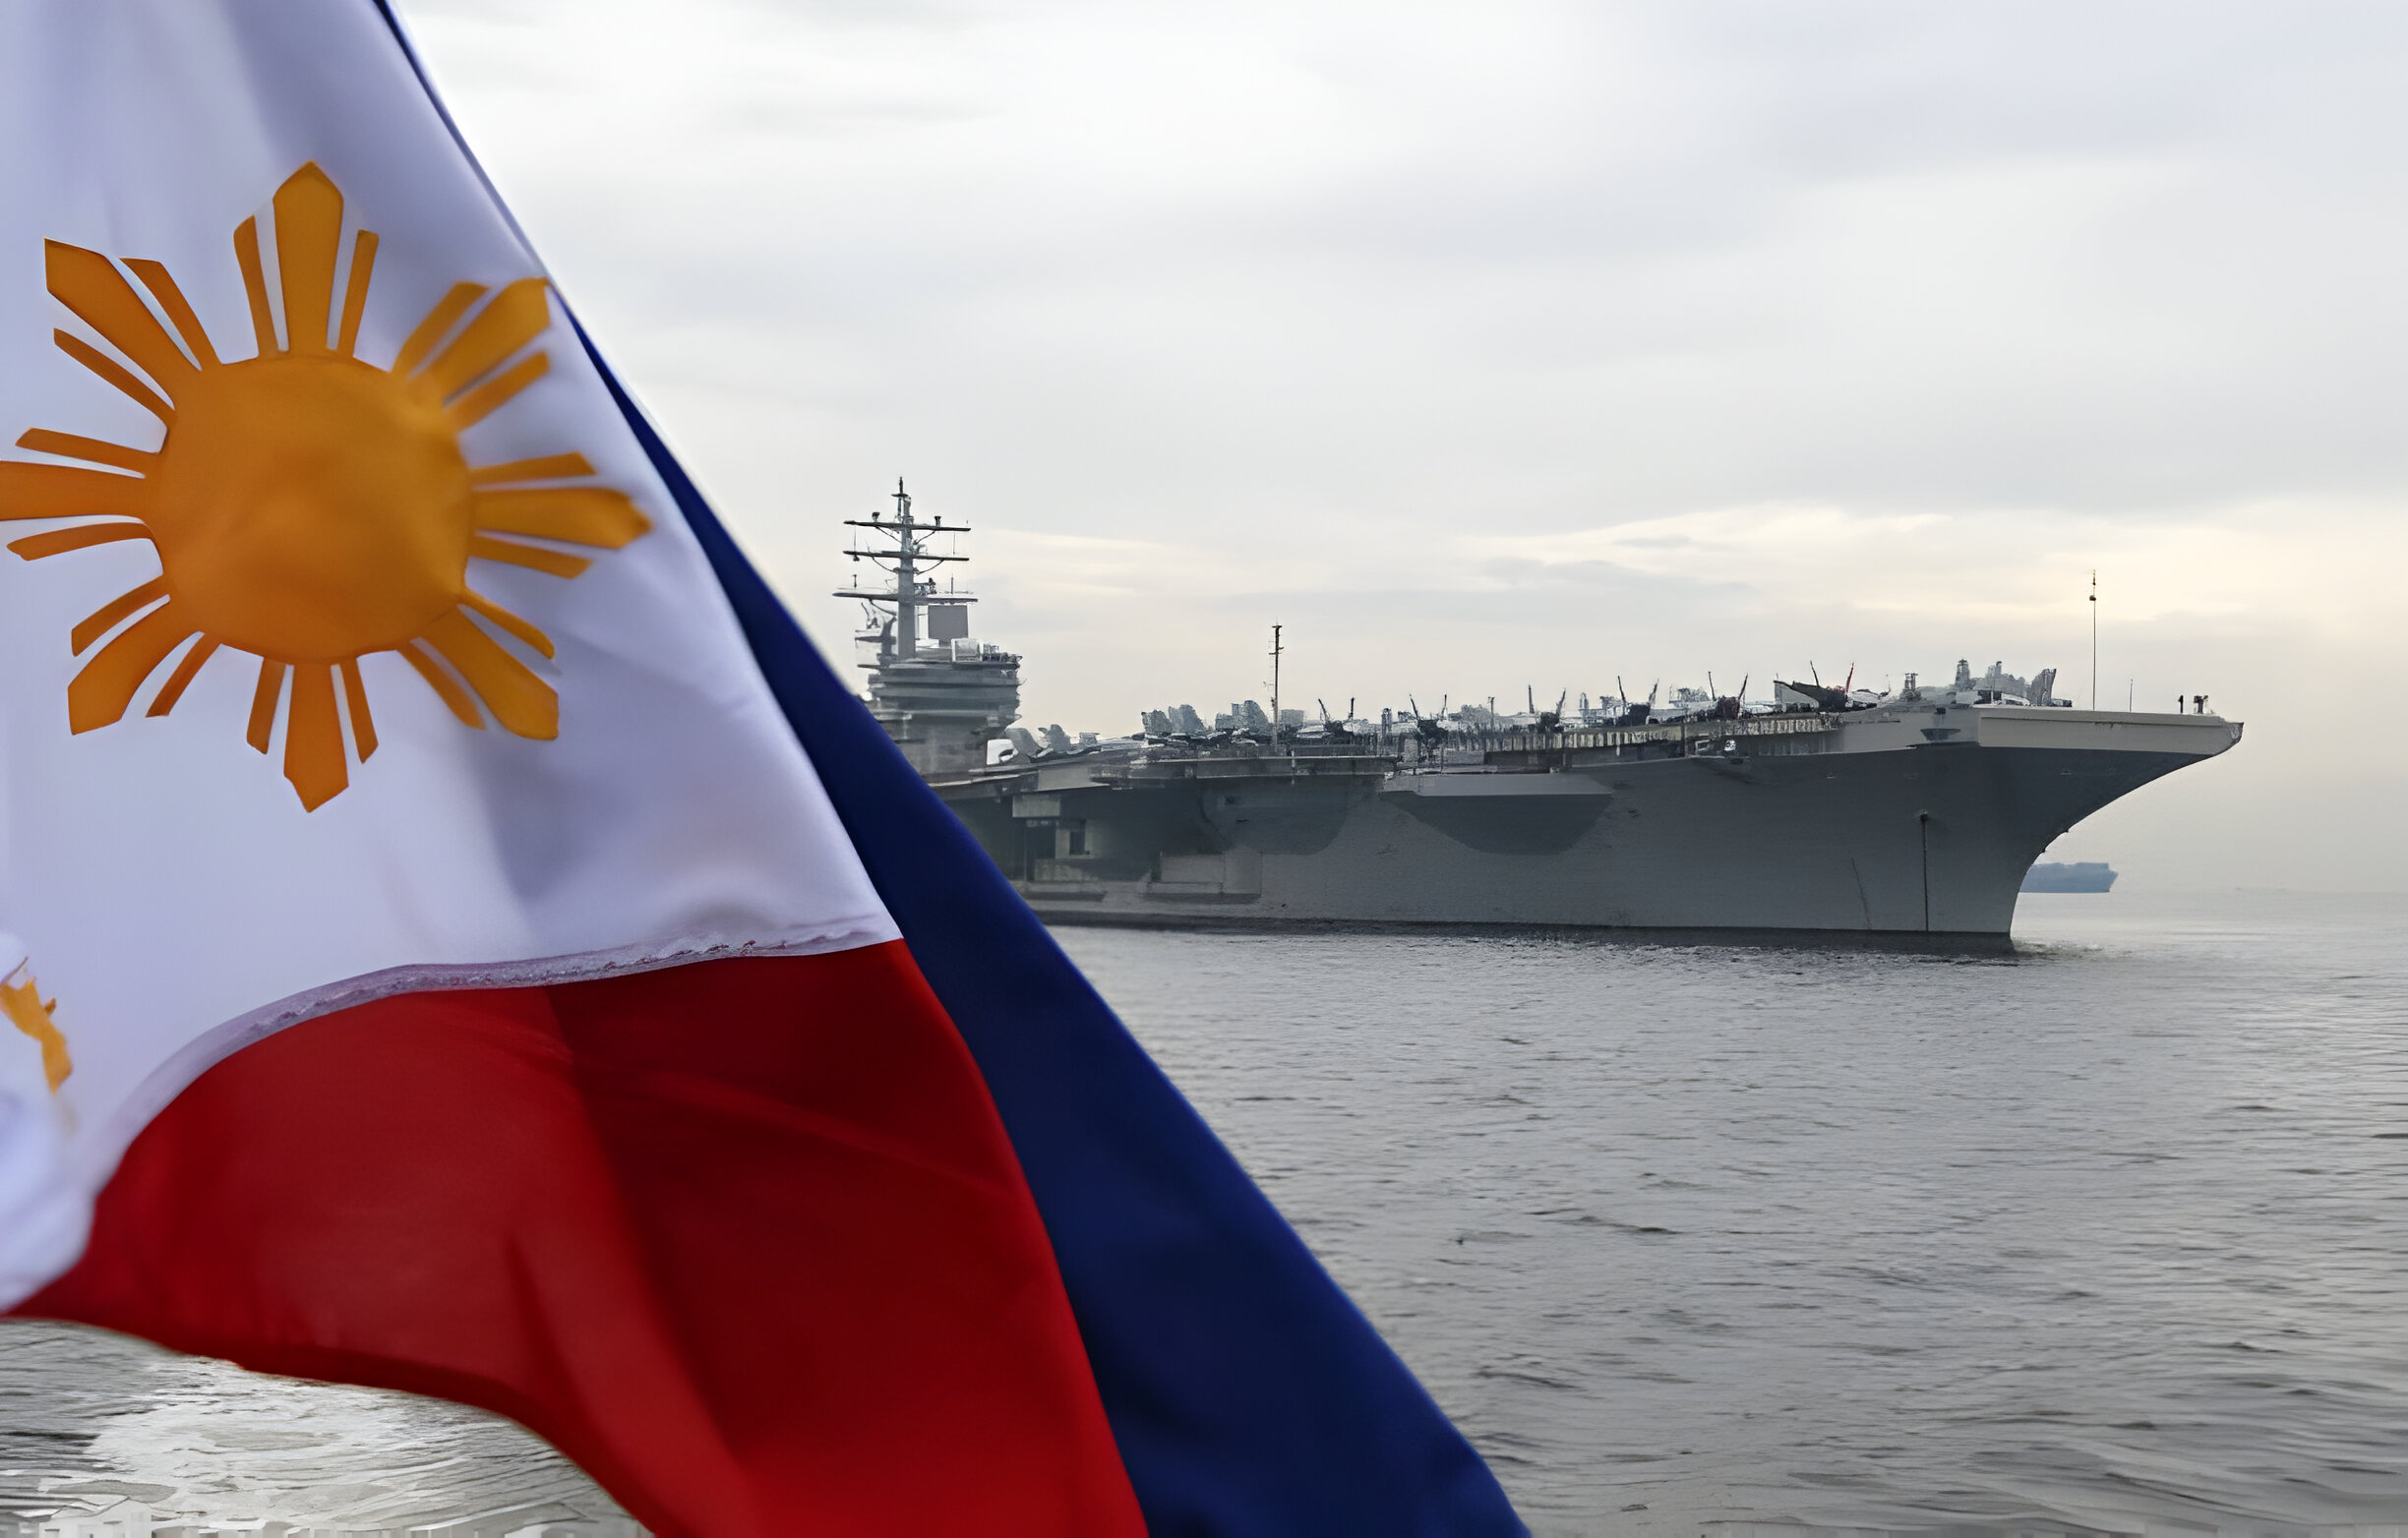 A Philippine flag flutters as the nuclear-powered aircraft carrier USS Ronald Reagan (CVN-76) is seen anchored off Manila bay on June 26, 2018. - A US aircraft carrier visited the Philippines on June 26, the third such call in four months, as its admiral hailed America's "enduring presence" in a region where China's military build-up had raised tensions. (Photo by TED ALJIBE / AFP) (Photo by TED ALJIBE/AFP via Getty Images)